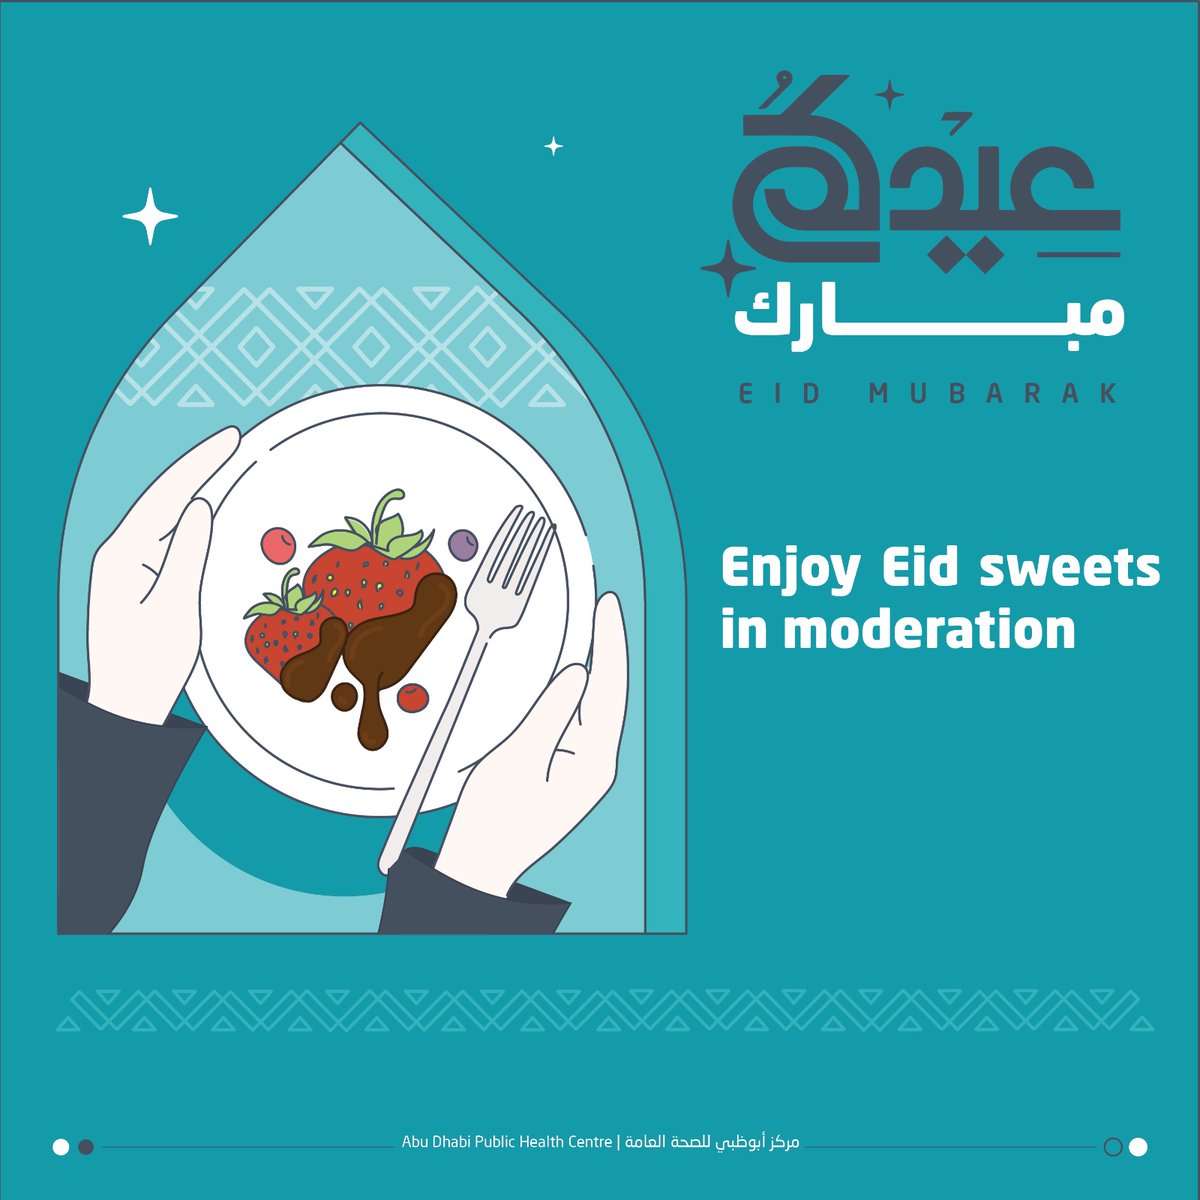 Indulge in Eid sweets in moderation. Try to opt for healthier dessert options with greater nutritional value, such as fresh fruits and nuts. #EidMubarak #HealthyEid #Towards_a_healthy_and_safe_society #ADPHC #HealthyHabitsHealthyLife